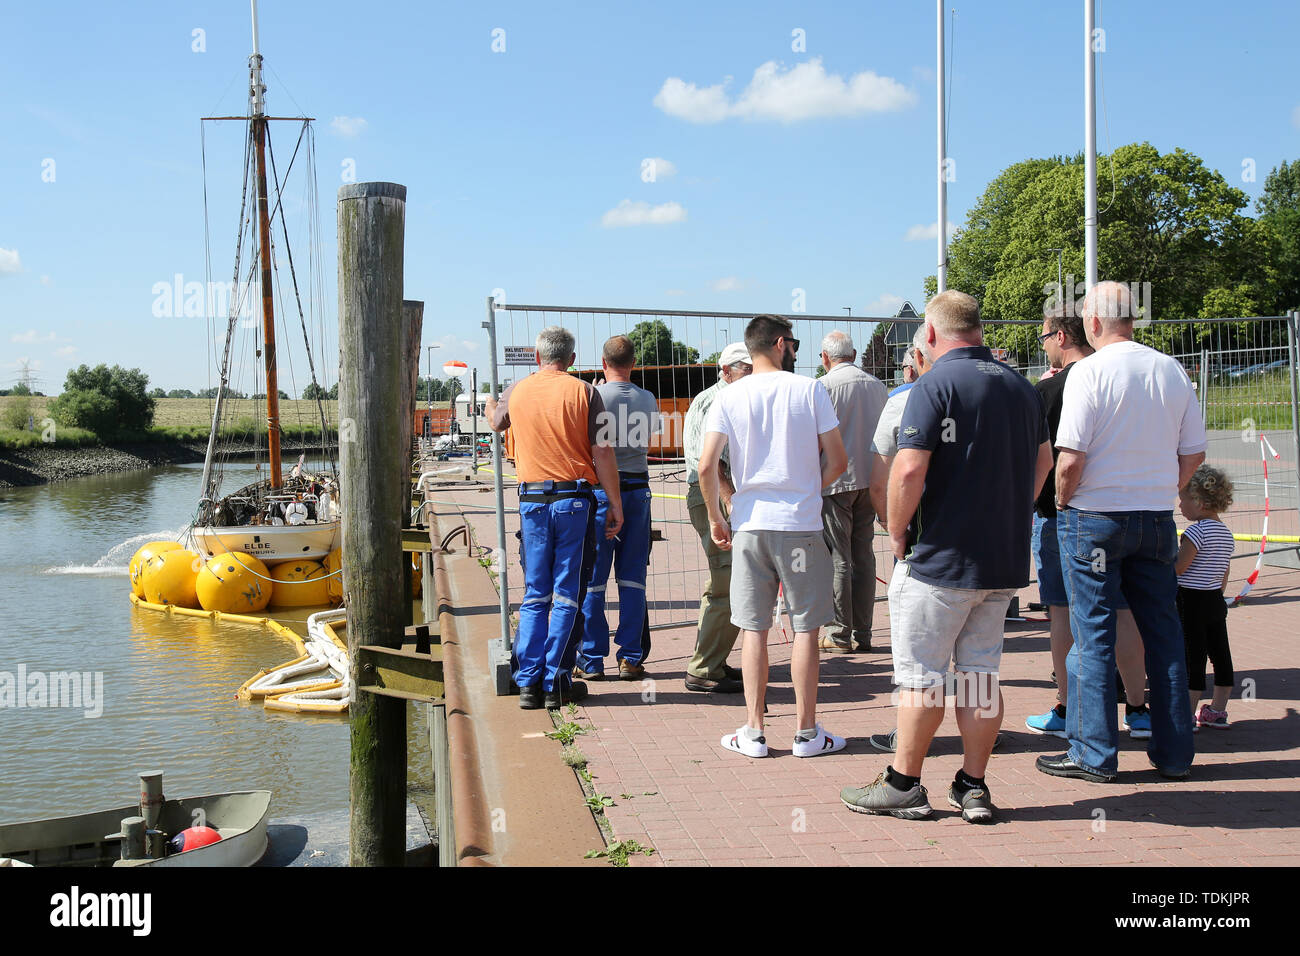 Stadersand, Germany. 17th June, 2019. The work on the sailing ship No. 5 Elbe, which was lifted last night and is located at the pier in Stadersand, is being followed by onlookers. The historic pilot schooner, which has only recently been extensively renovated, collided with a container ship on the Elbe and sank. Last night the ship was lifted with air cushions. Credit: Bodo Marks/dpa/Alamy Live News Stock Photo